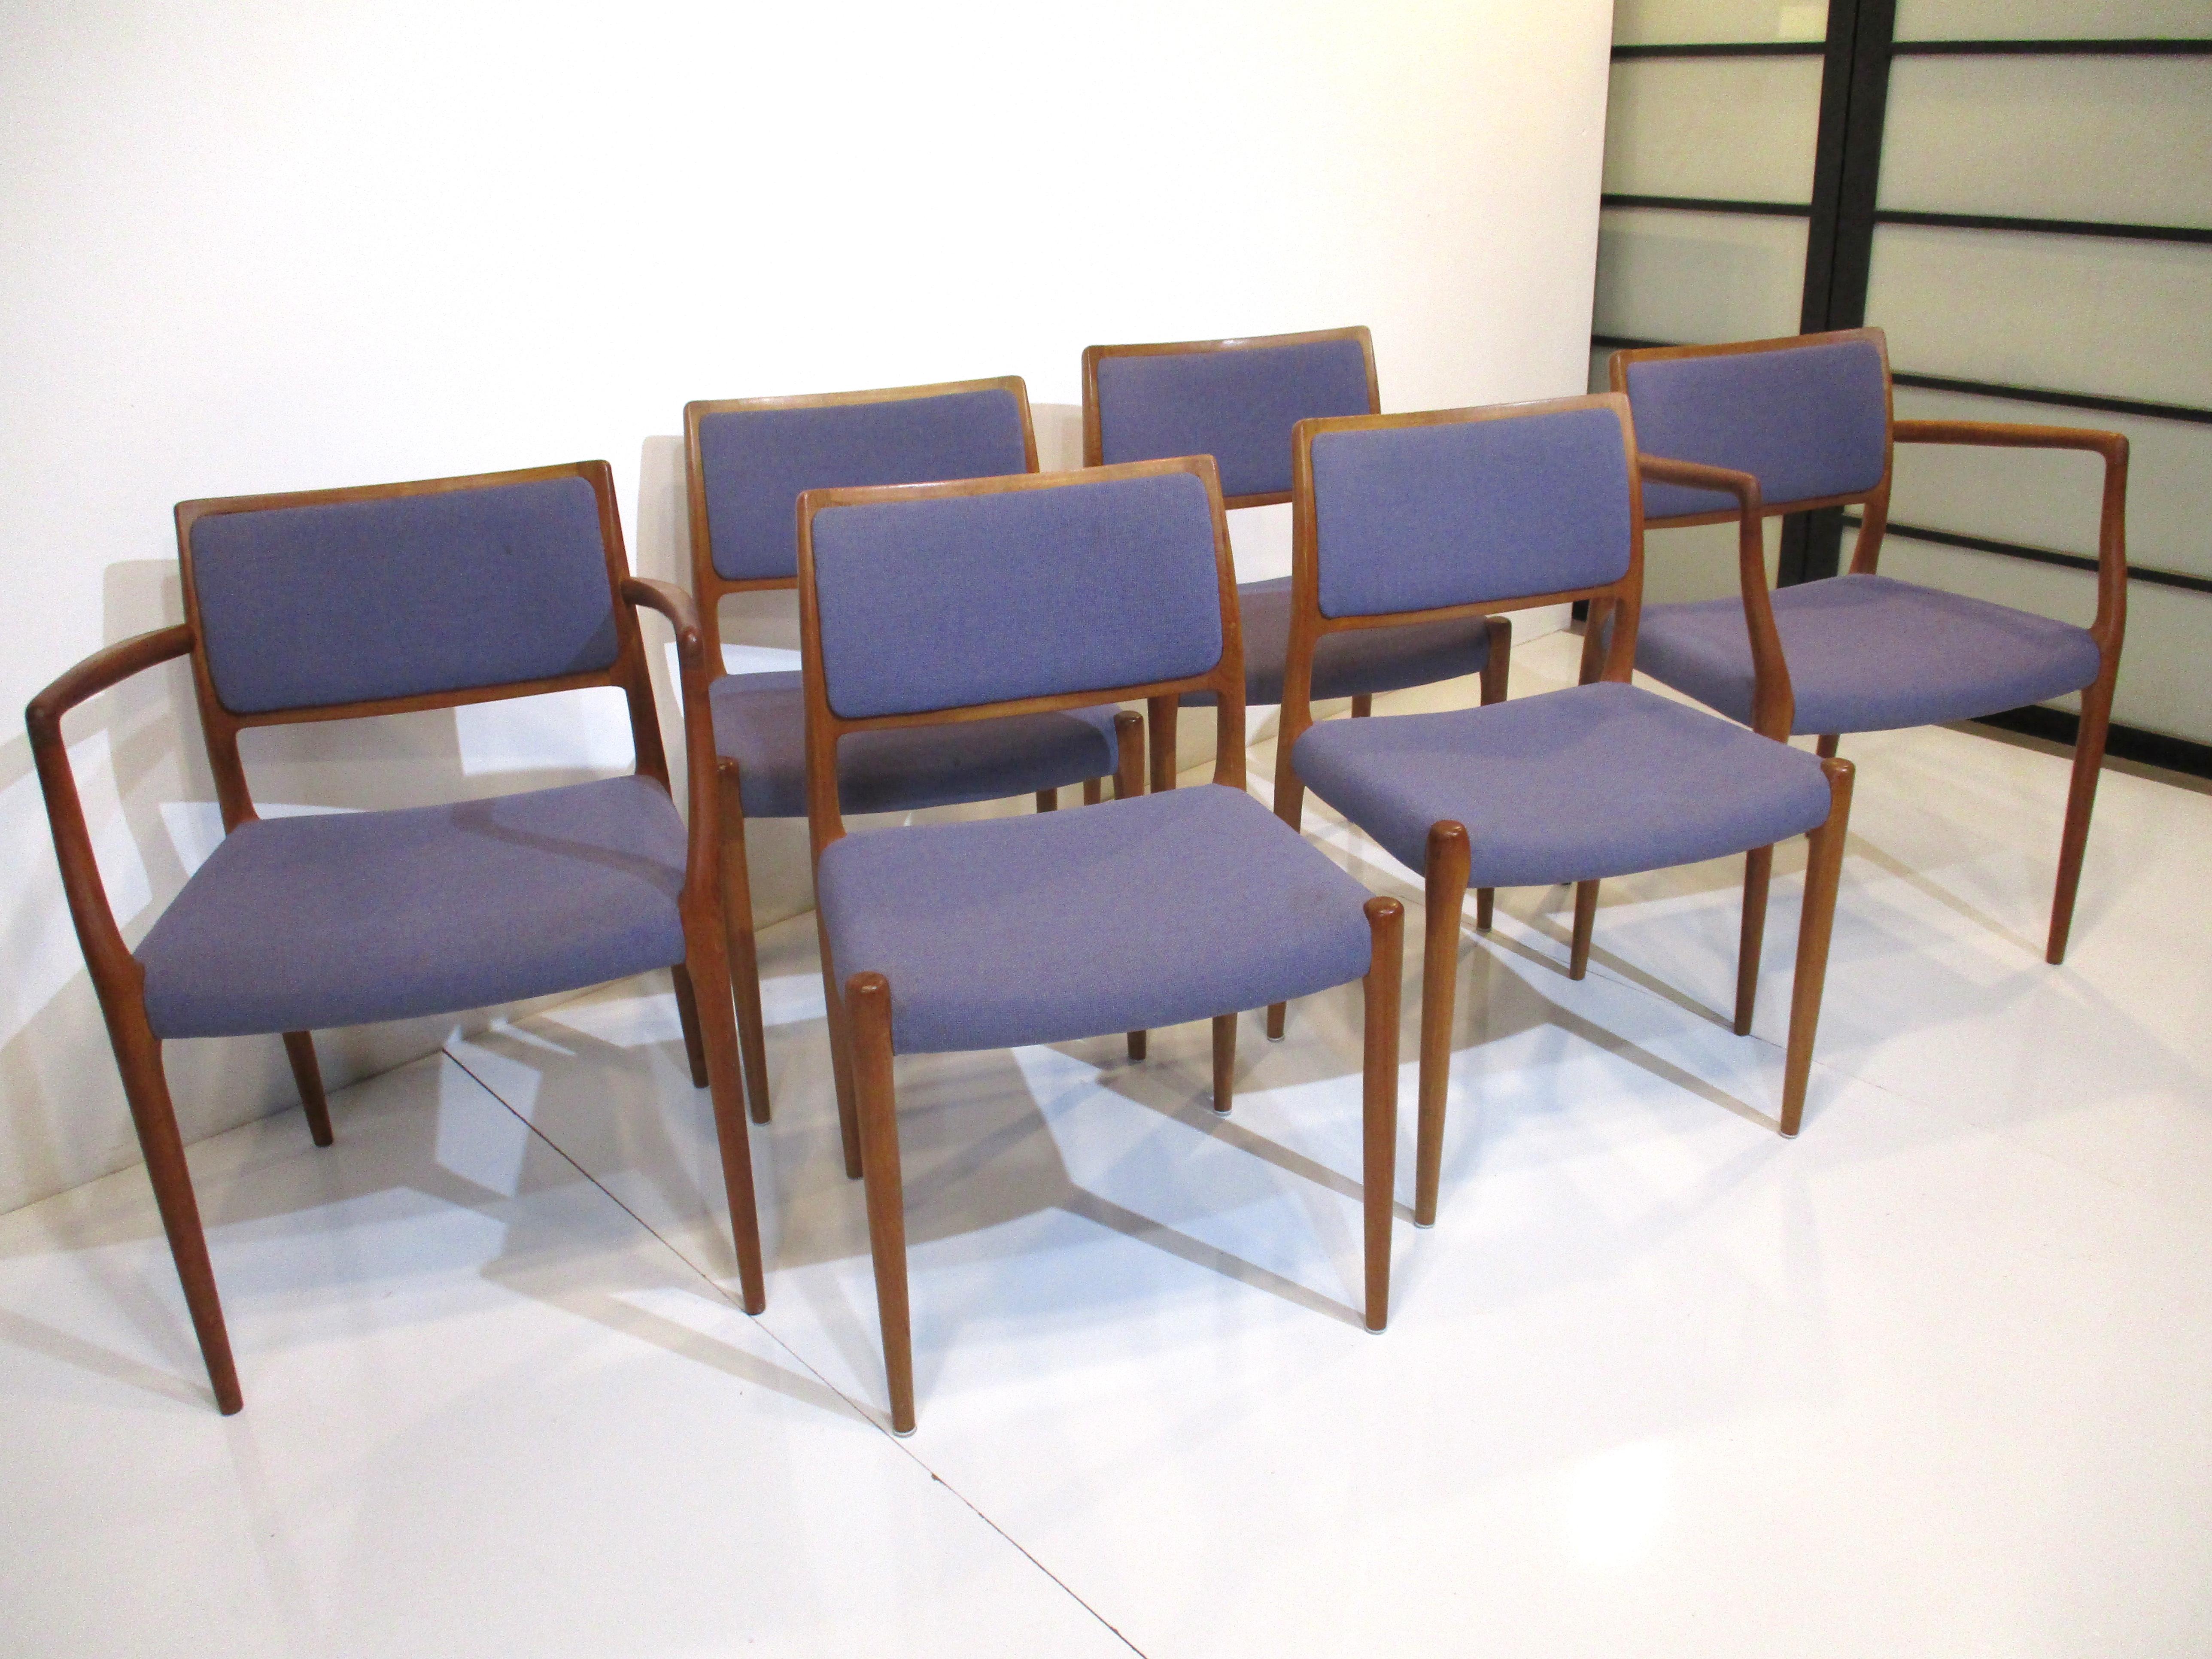 A set of six sculptural teak wood framed dining chairs upholstered in a tight woven light purple violet fabric. The set has four side chairs and two arm chairs which are very well crafted and comfortable designed and manufactured by Niels Otto